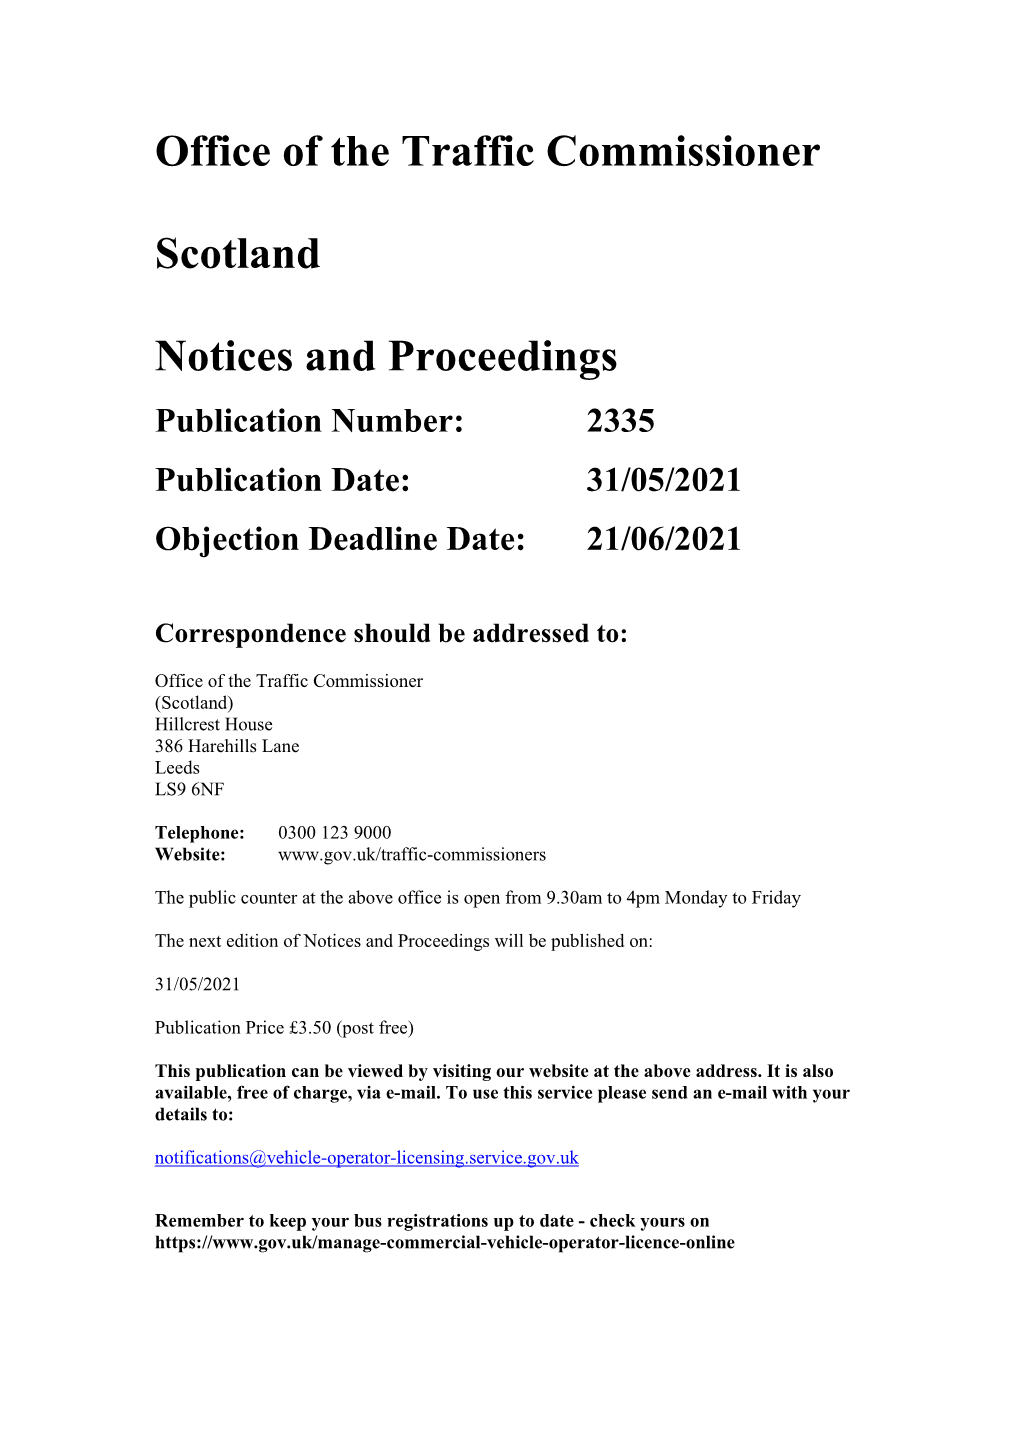 Notices and Proceedings for Scotland 2335